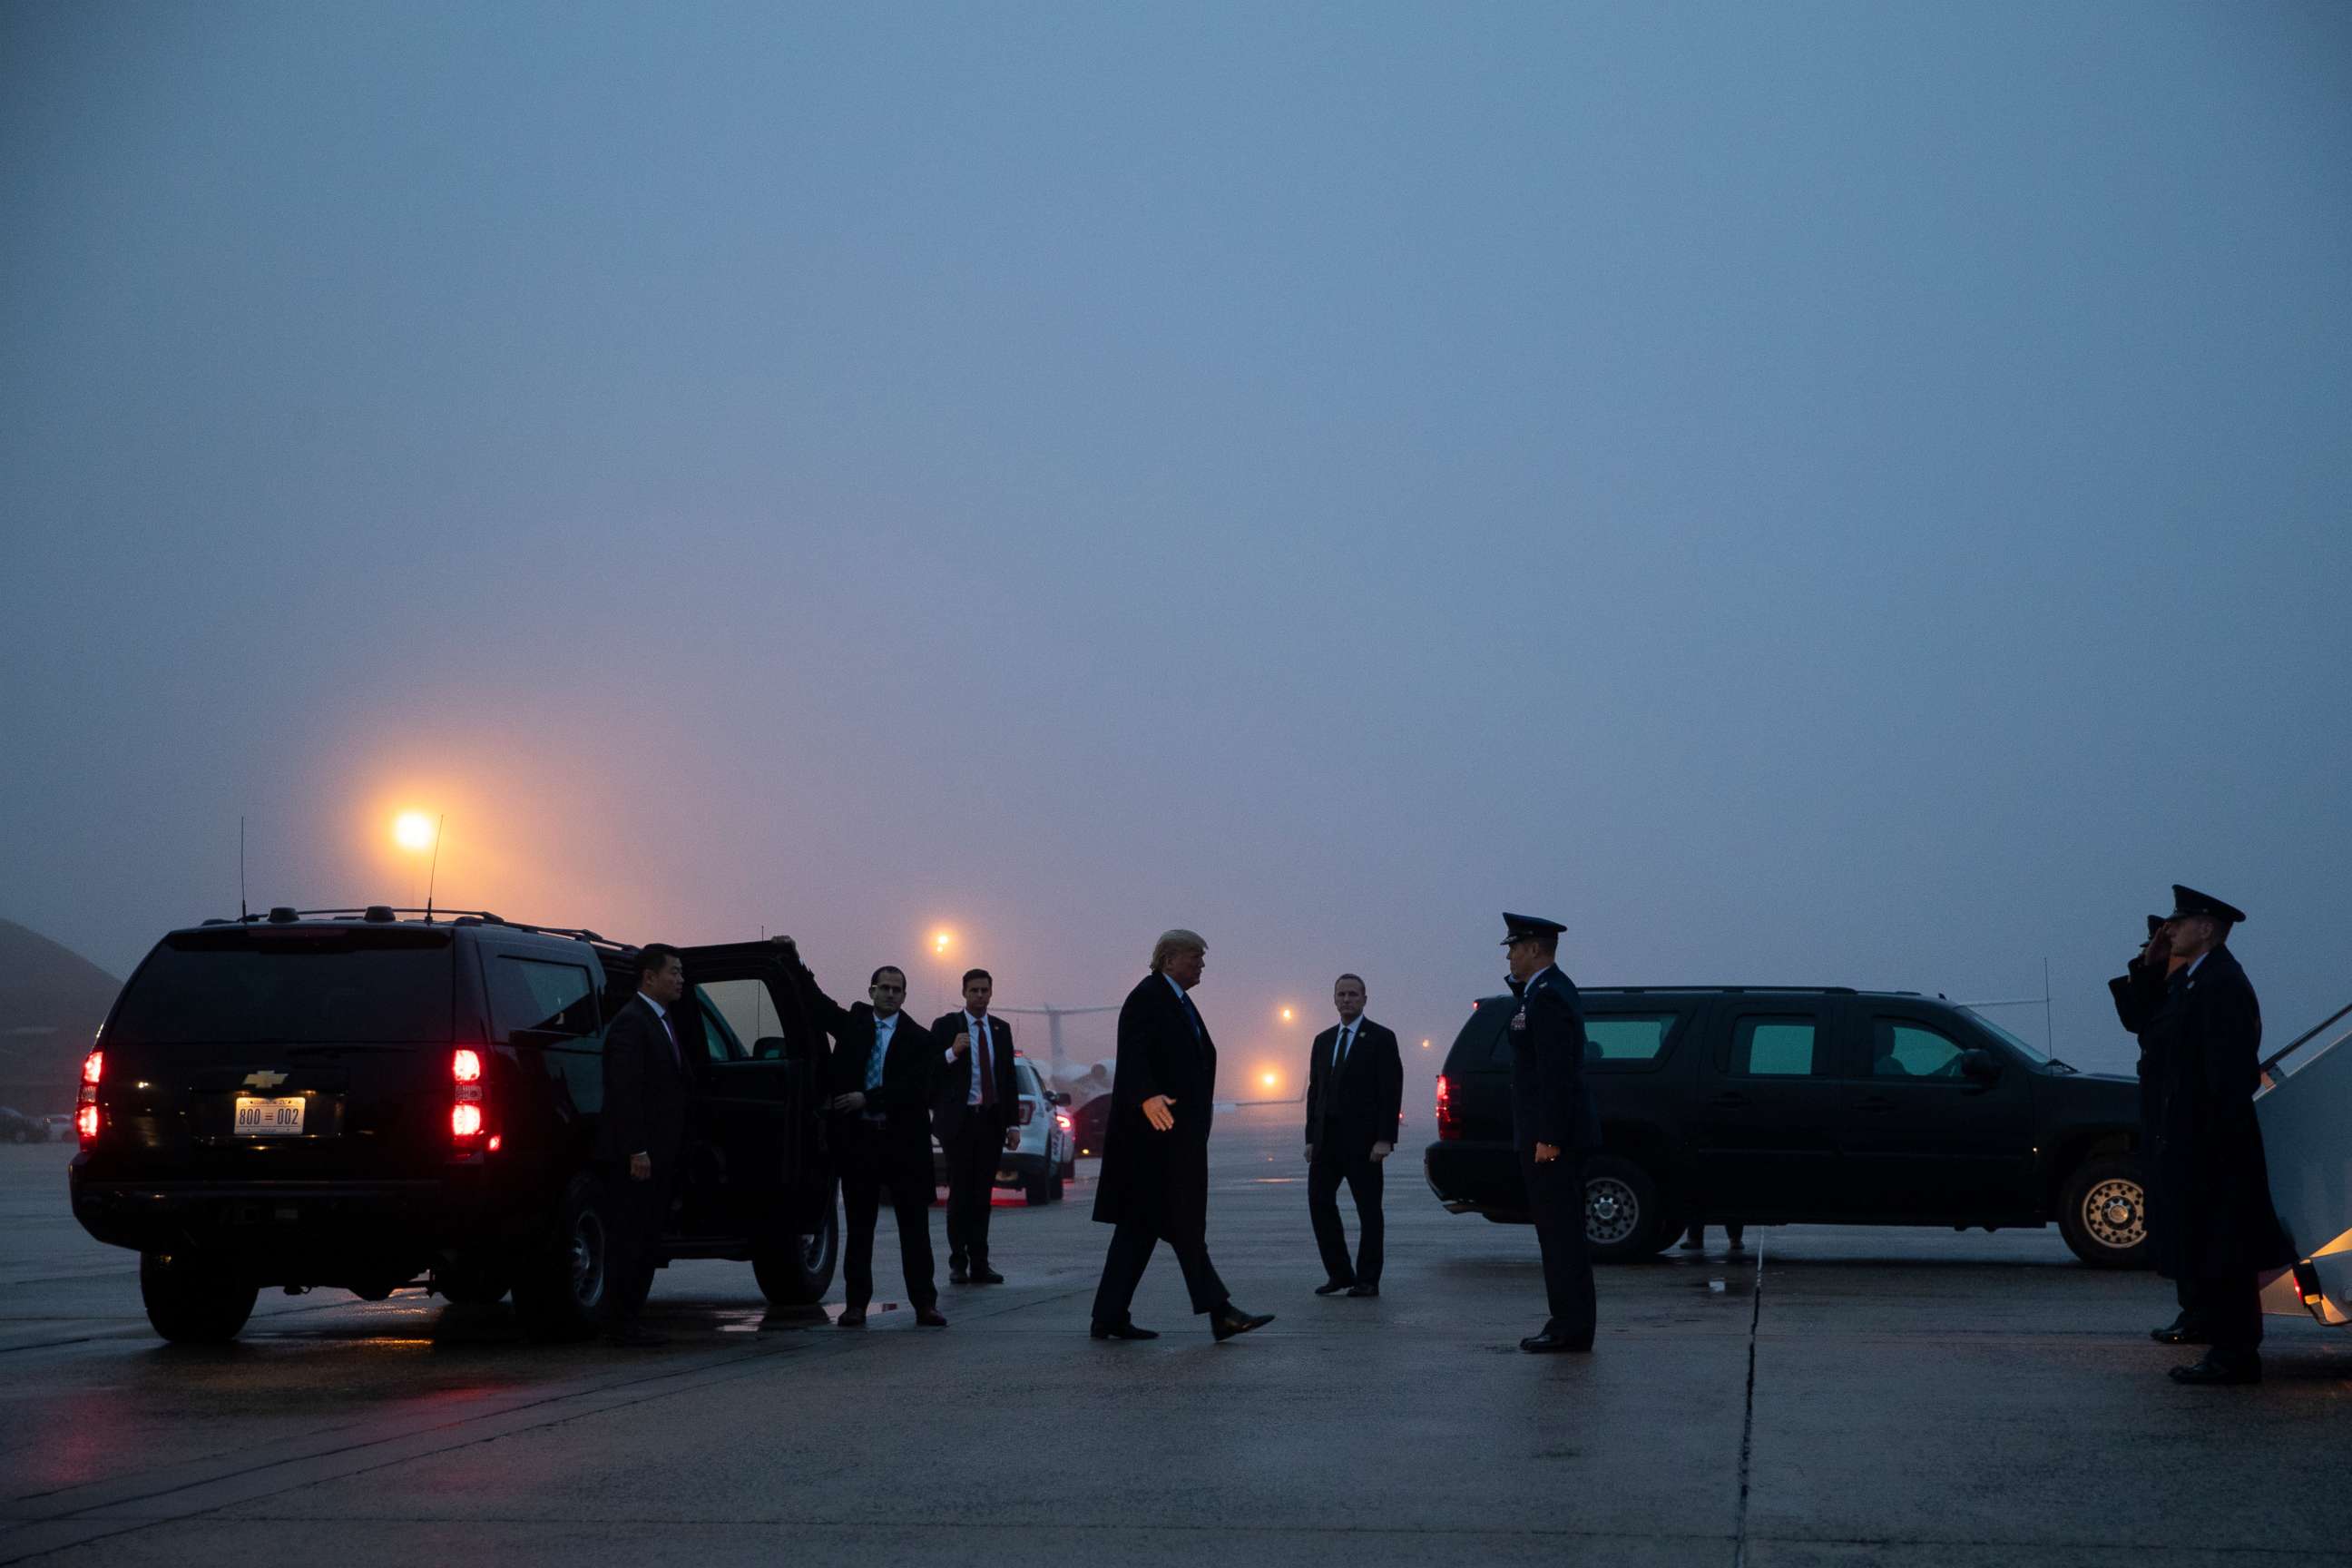 PHOTO: President Donald Trump boards Air Force One for a trip to Milwaukee to attend a campaign rally, Jan. 14, 2020, in Andrews Air Force Base, Md.